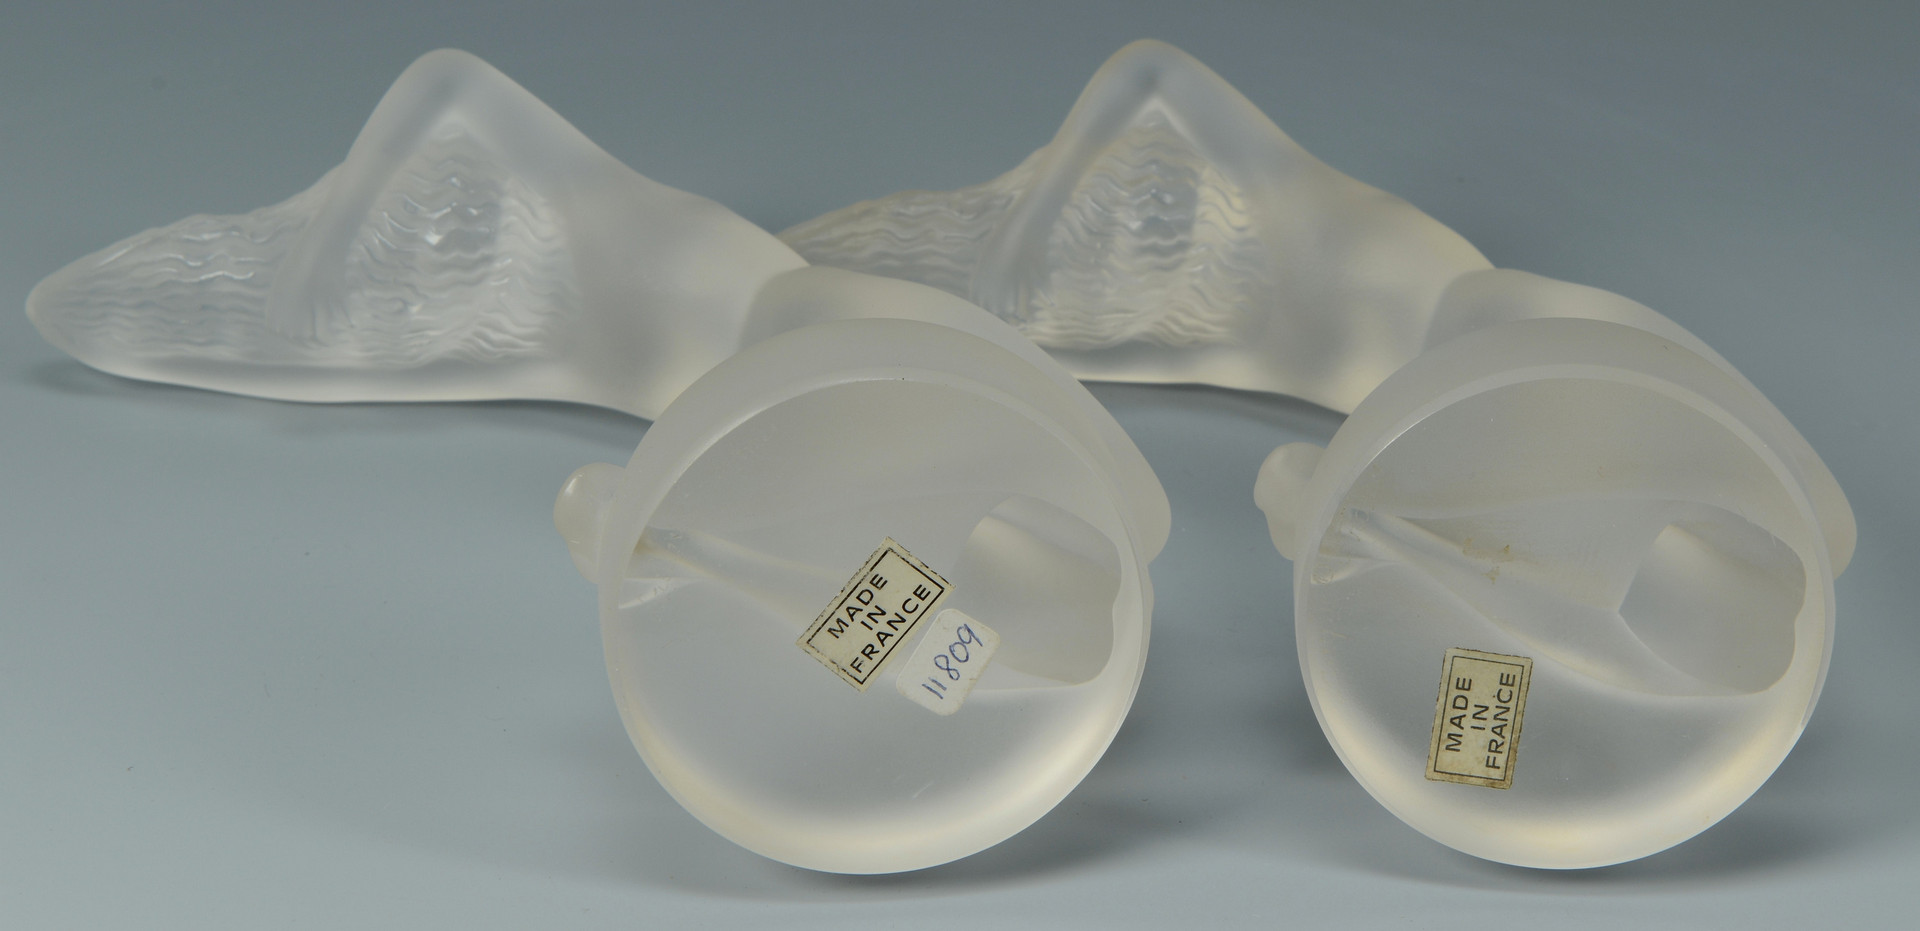 Lot 164: 4 Articles of Lalique Crystal